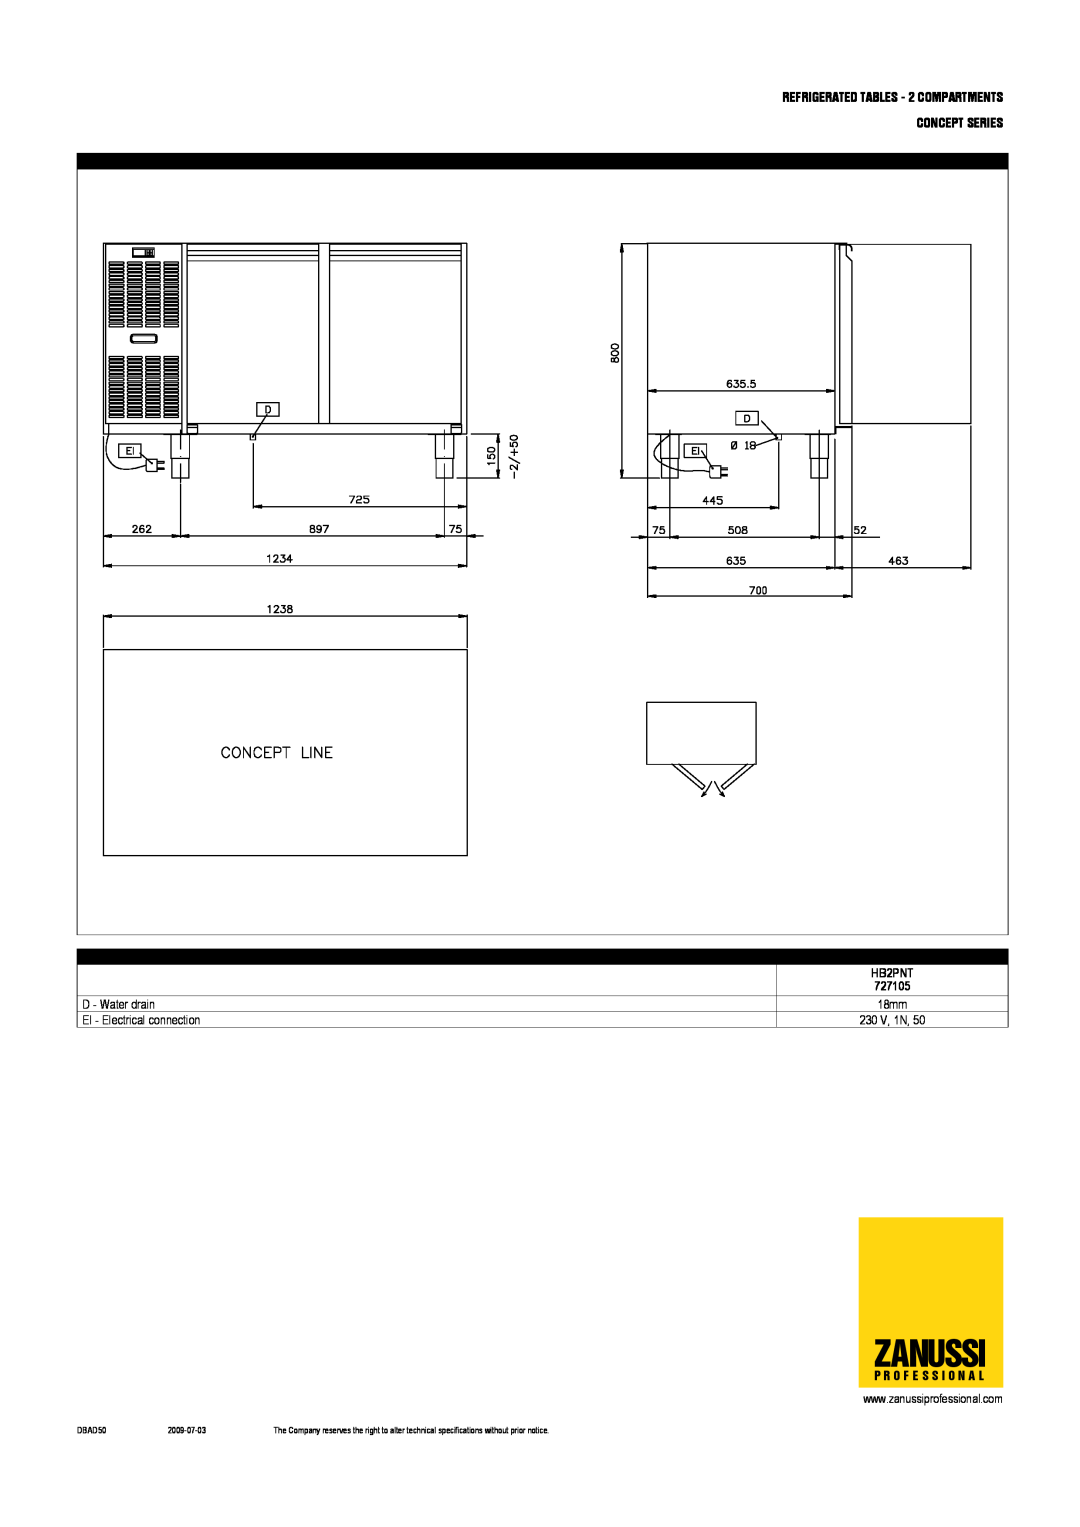 Zanussi 728139 Zanussi, REFRIGERATED TABLES - 2 COMPARTMENTS, Concept Series, HB2PNT, 727105, 18mm, DBAD50, 2009-07-03 